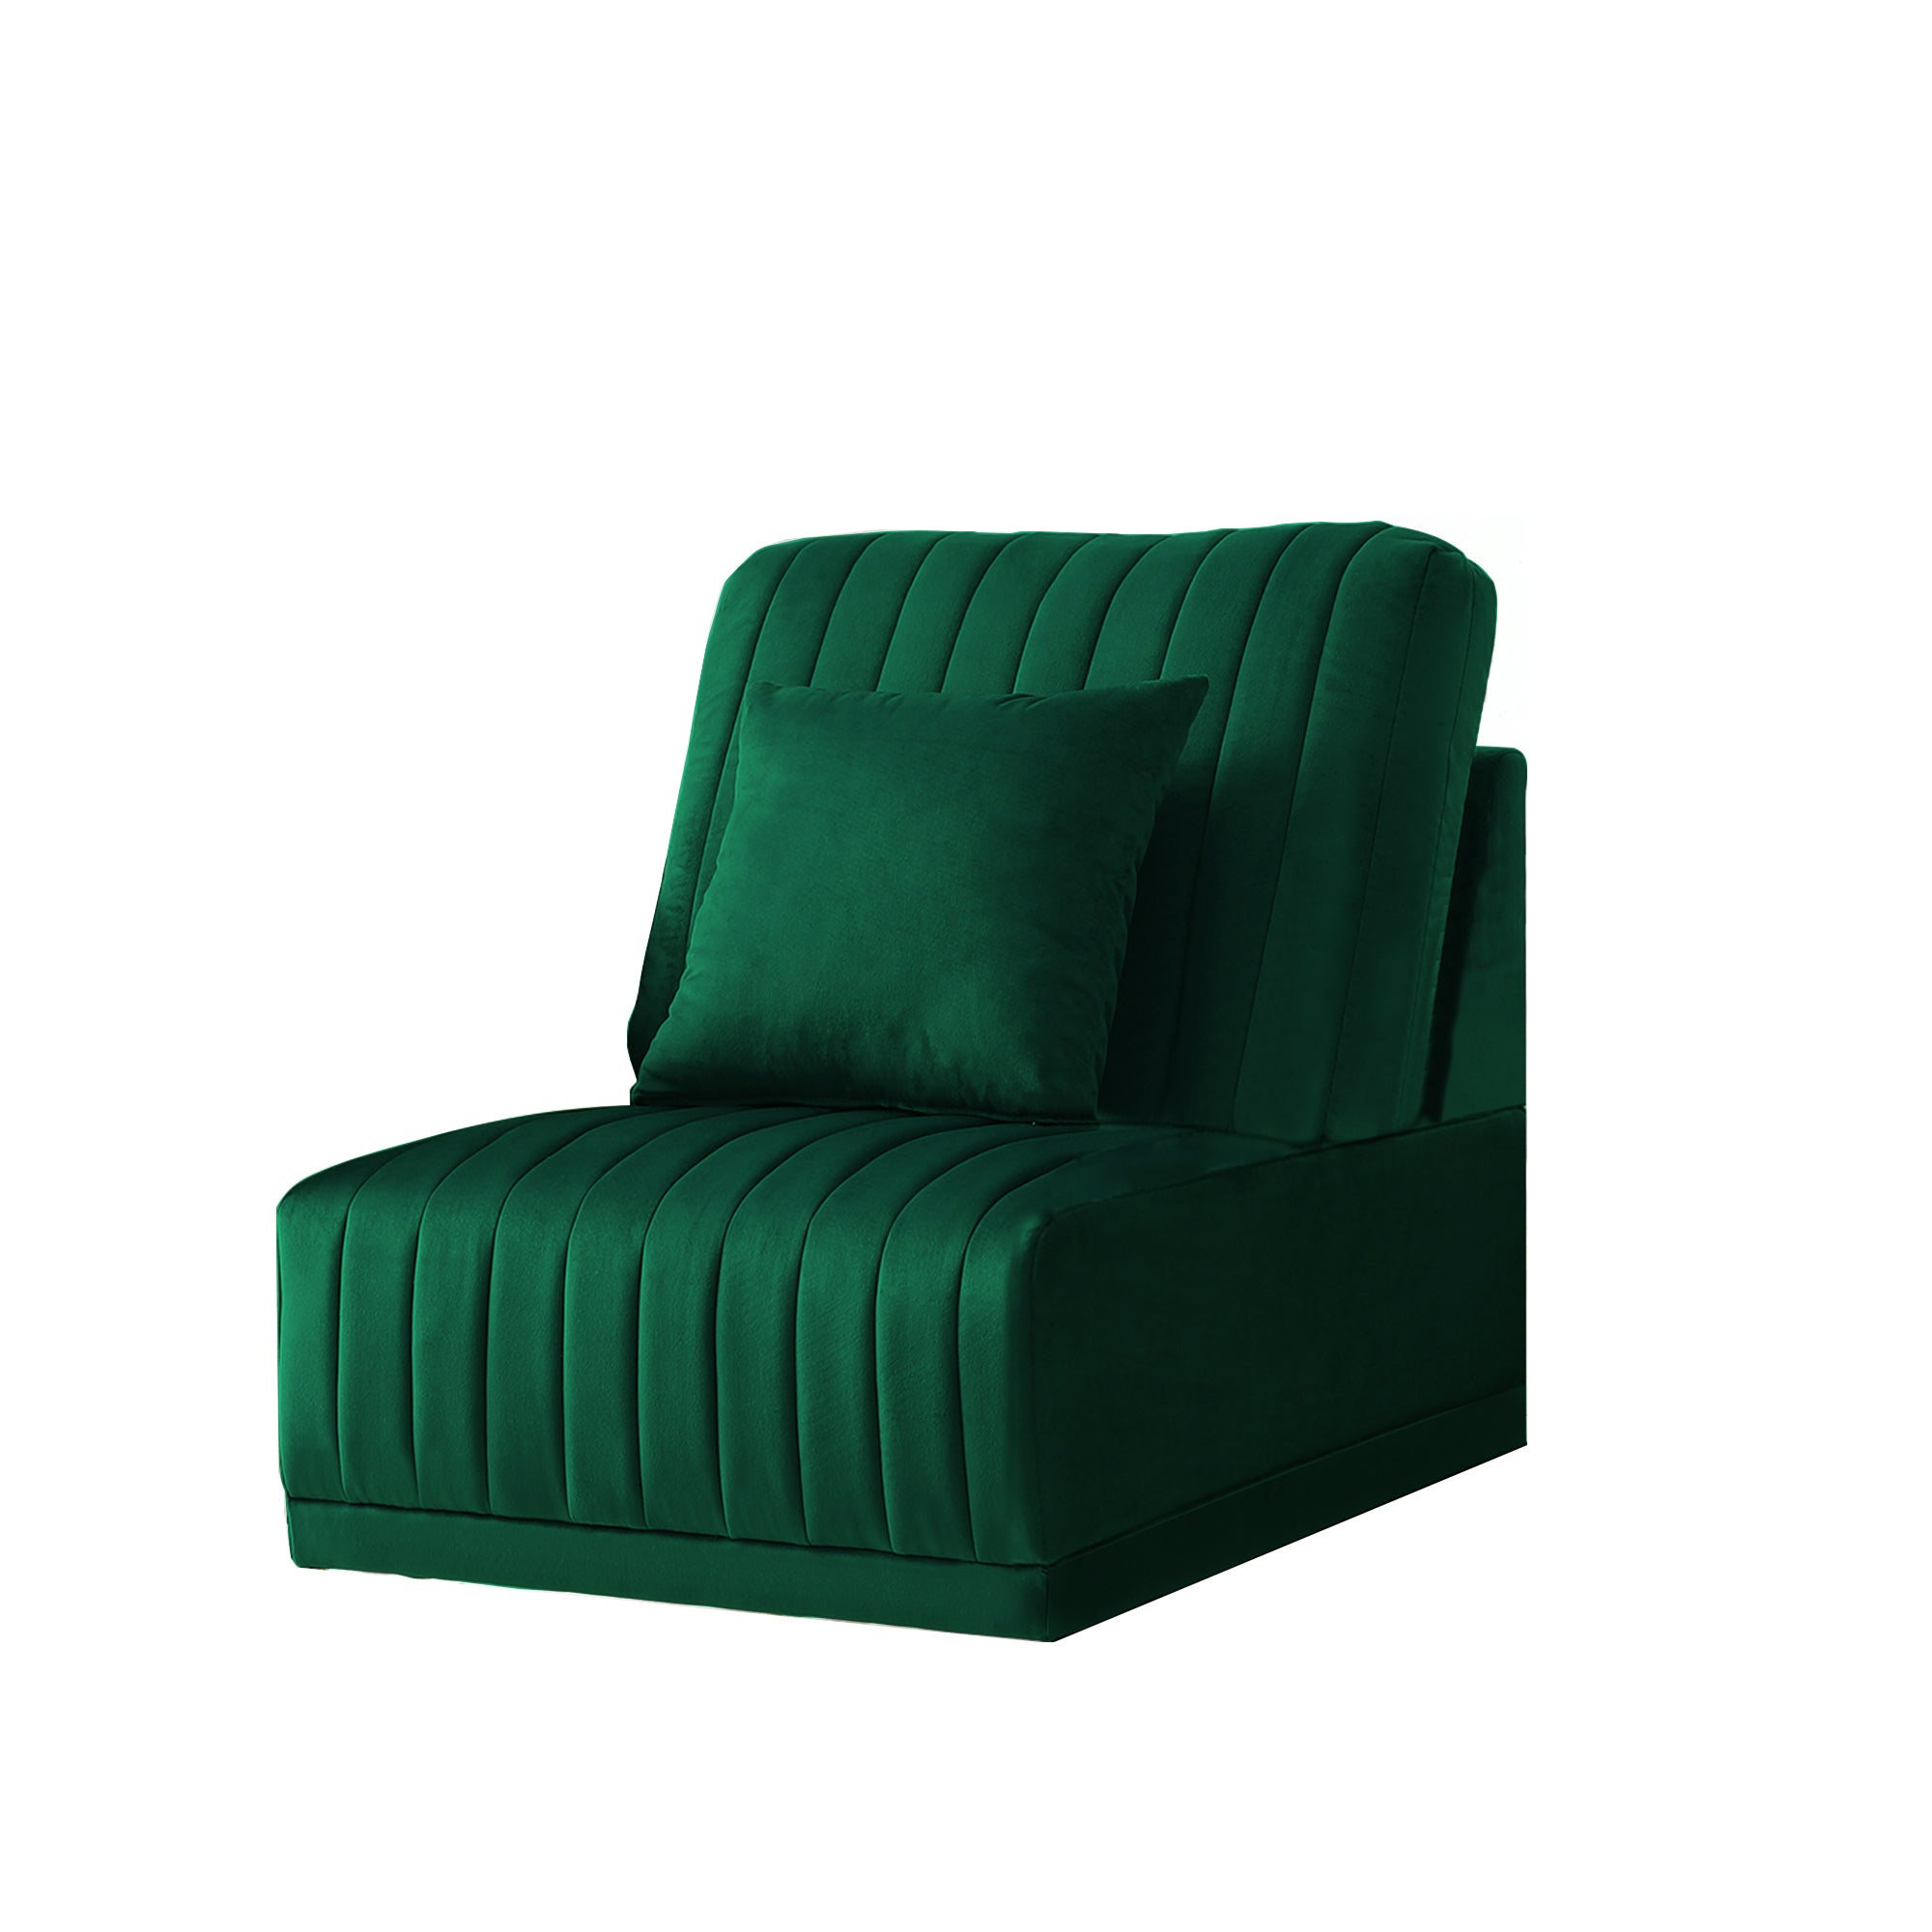 The green sofa without armrests is not sold separately green-foam-velvet